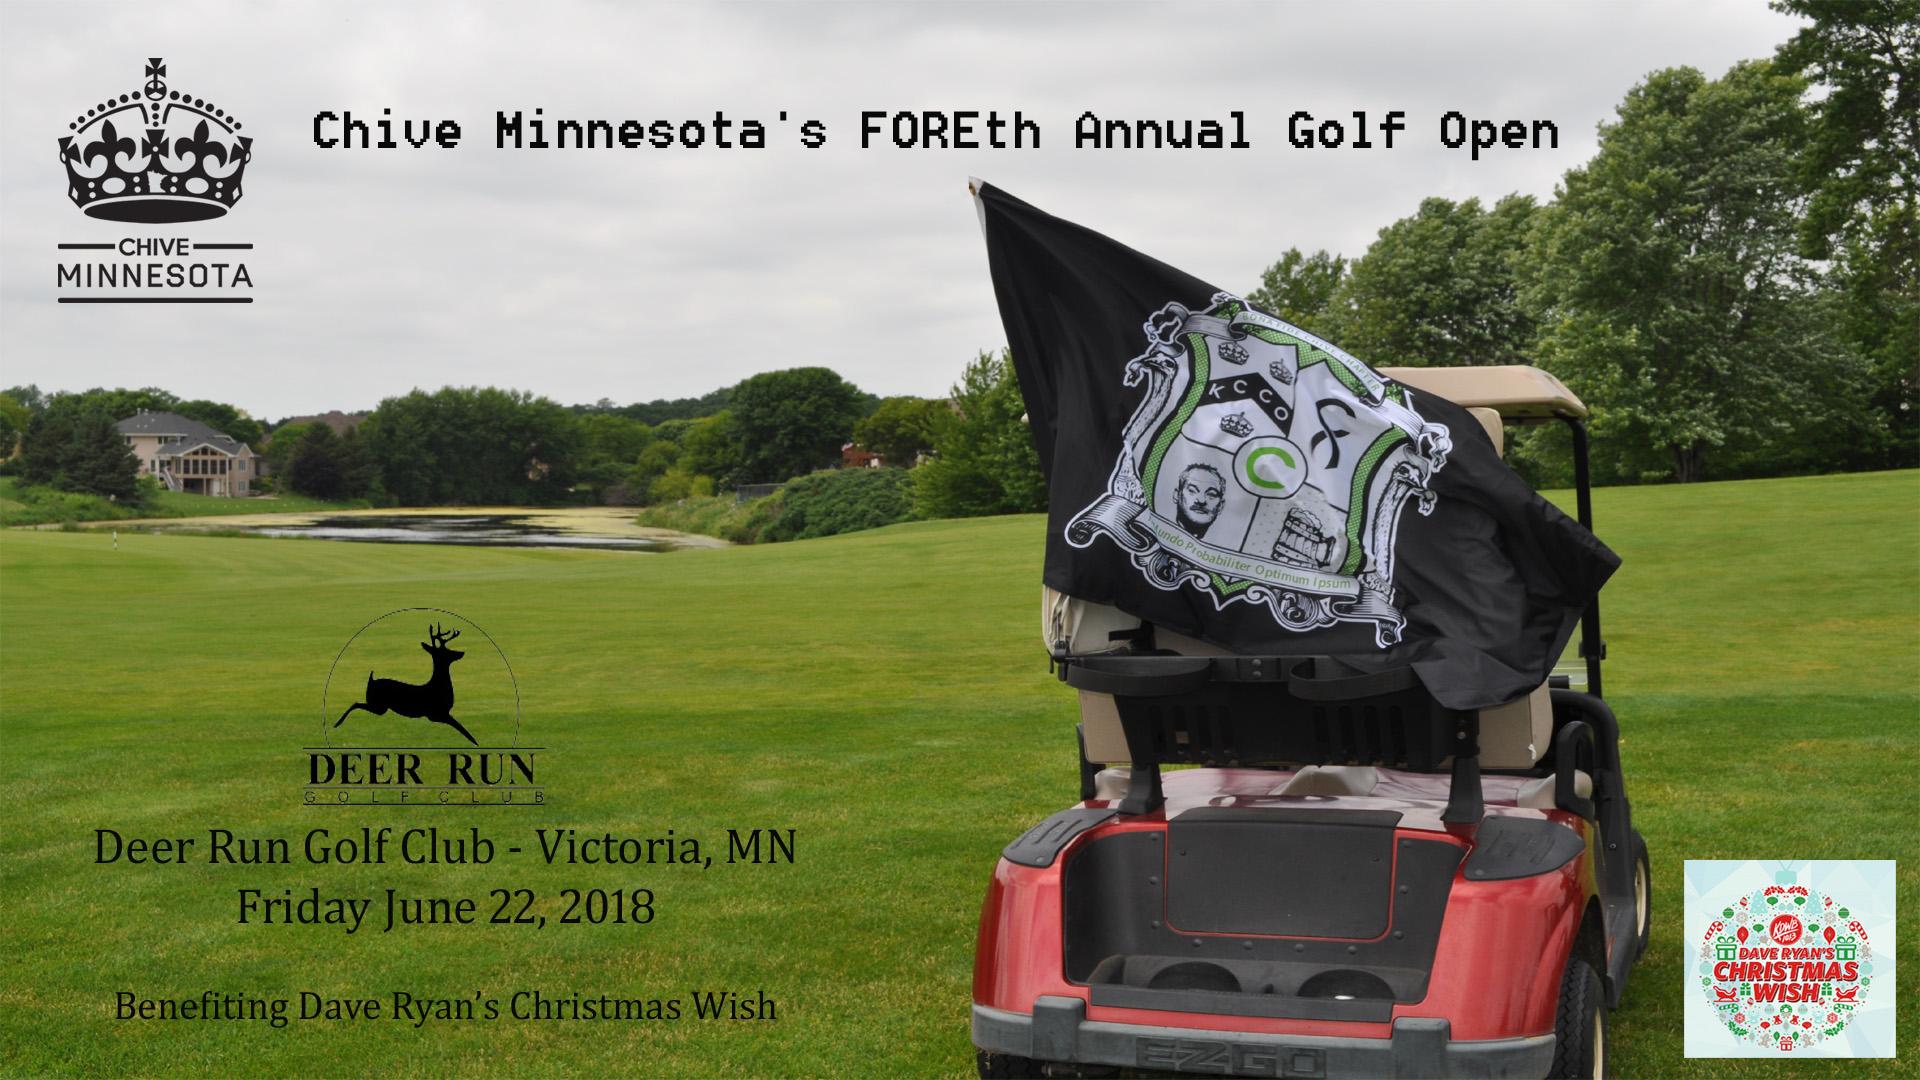 Chive Minnesota's FOREth Annual Chive Open!